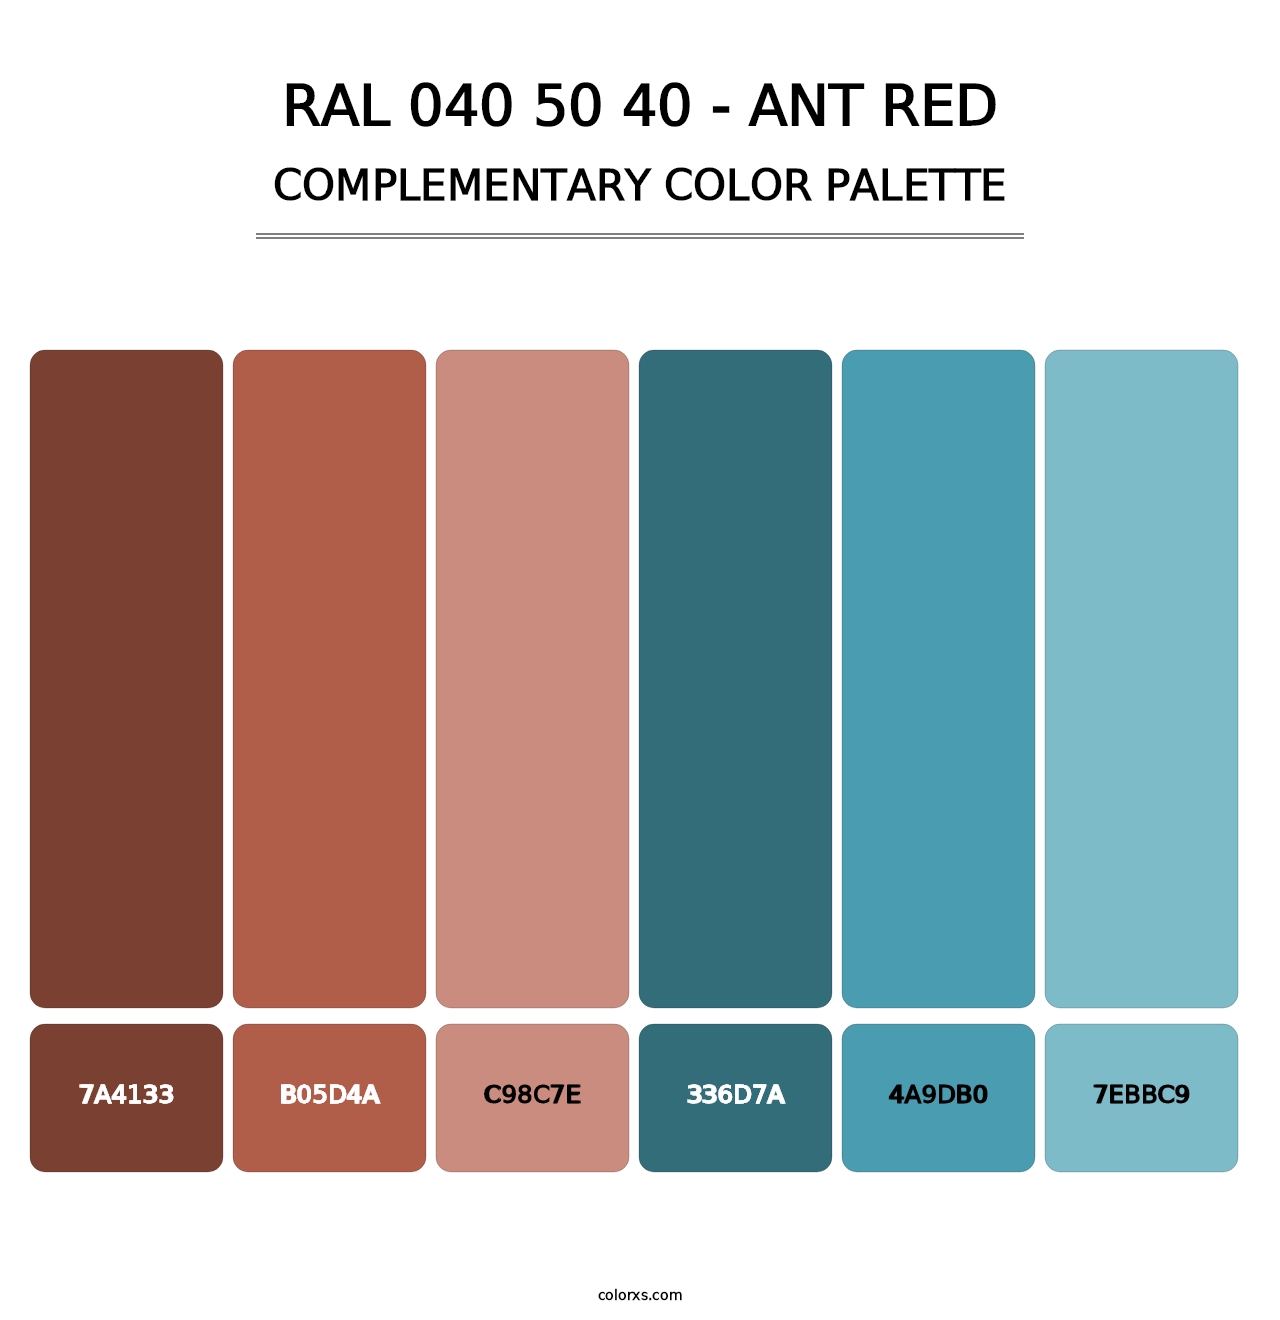 RAL 040 50 40 - Ant Red - Complementary Color Palette